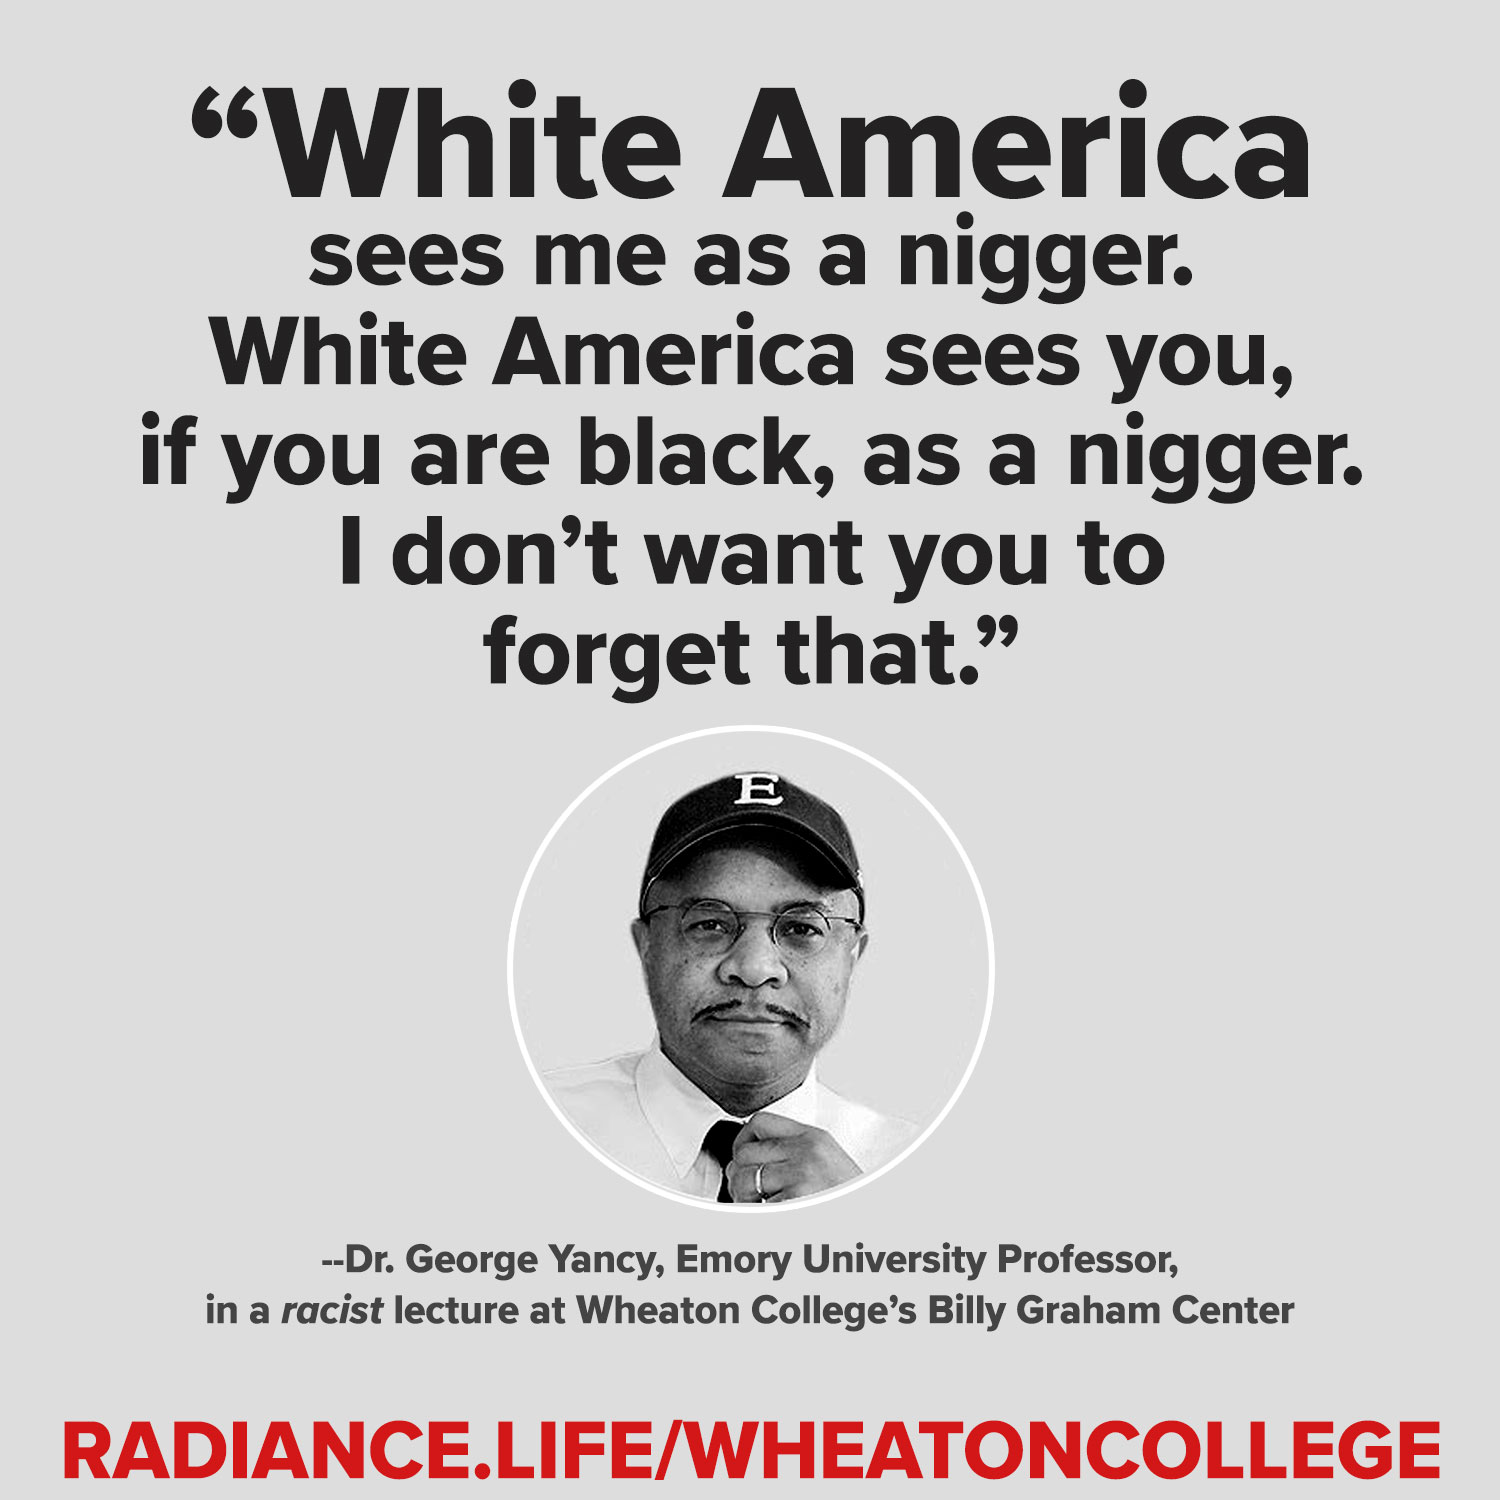 Wheaton College denounces Radiance's Ryan Bomberger but pays for racist lecture from George Yancy.